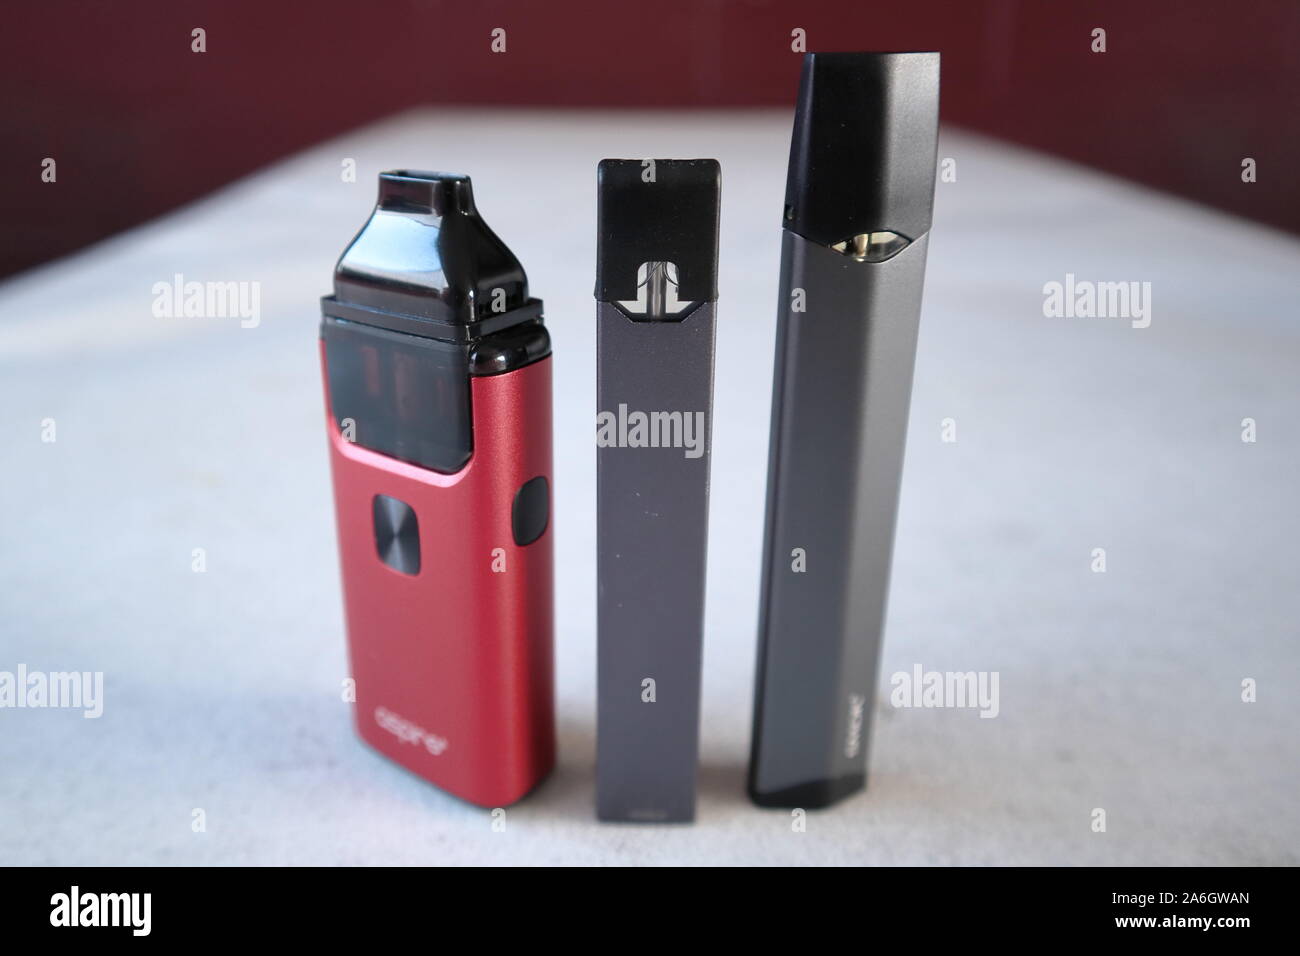 3 different vape pen electronic cigarette devices juul, aspire breeze, smok infinix, product shot isolated Stock Photo